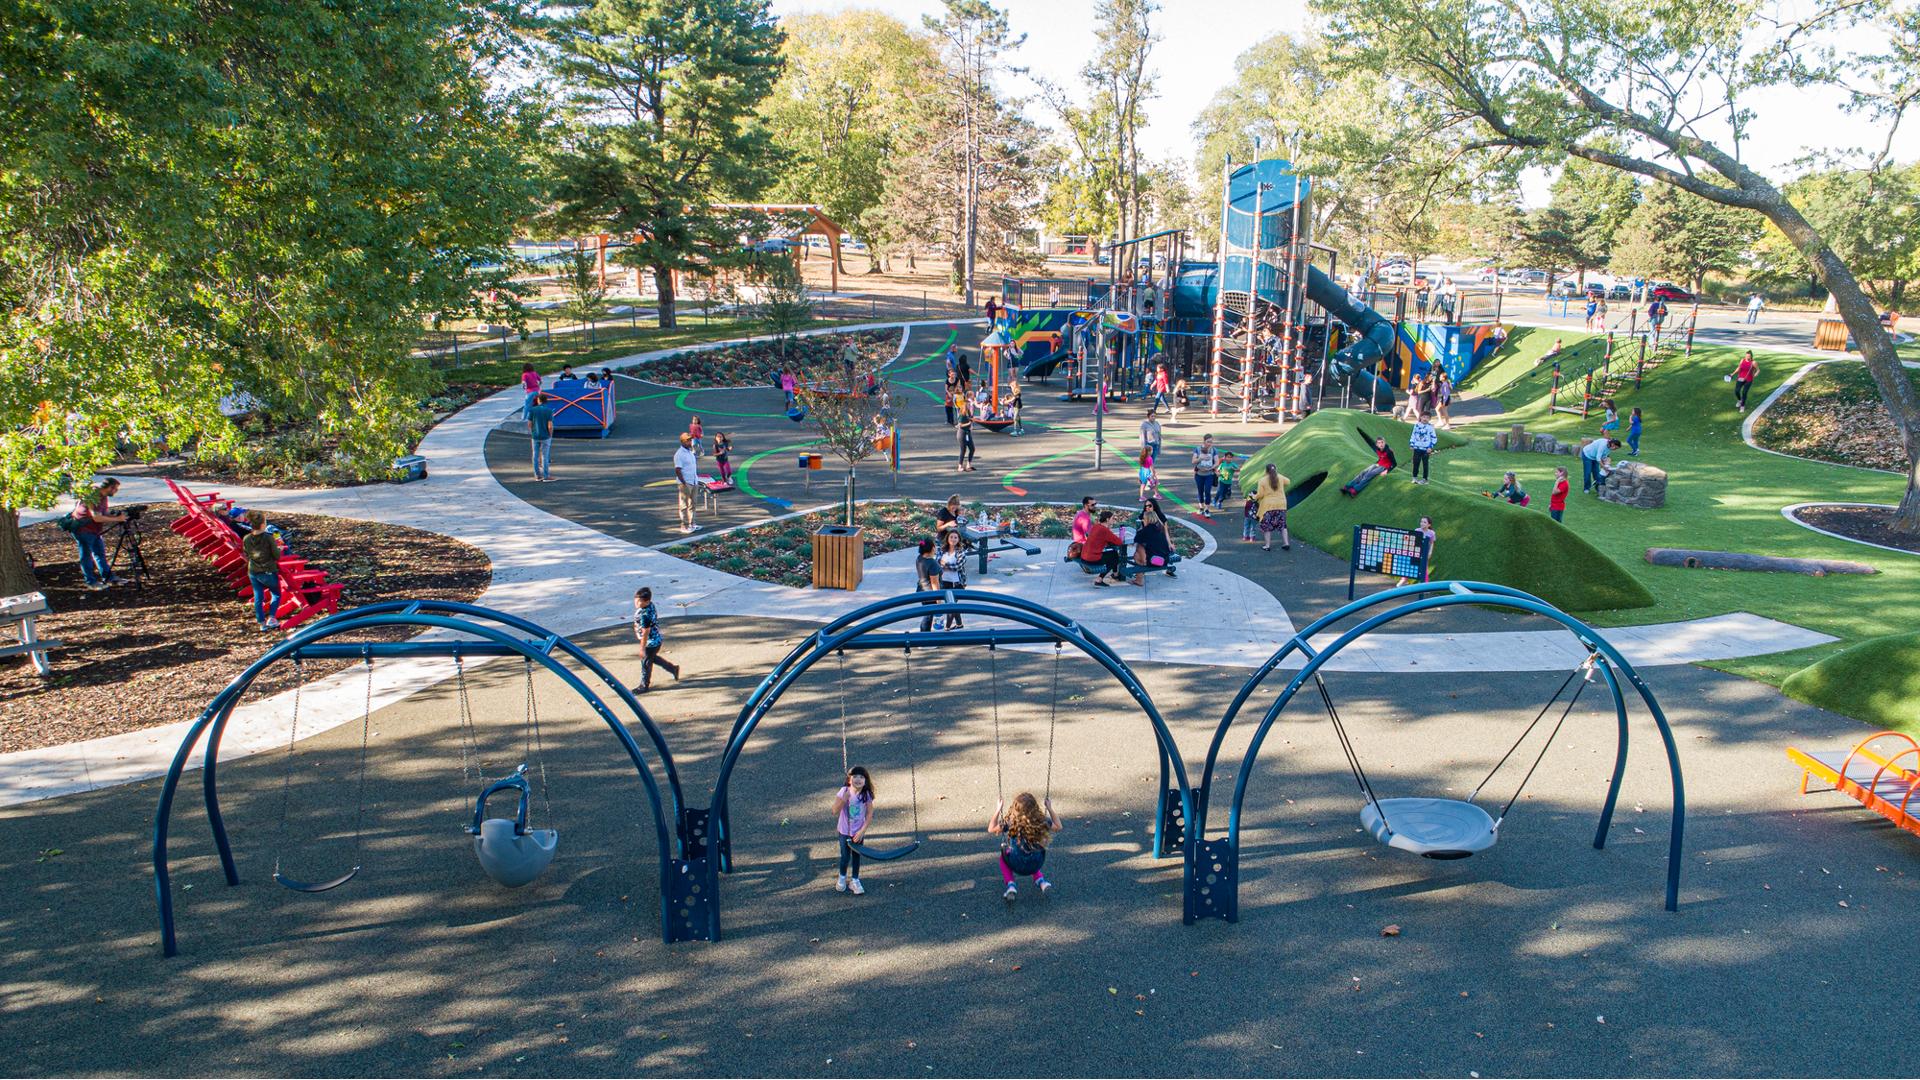 A large park surrounded by mature trees that shade the entire play area. Families sit at picnic tables and chairs around and scattered amongst the play area. Children play on a swing sets made up of three arch bays while a crowd of people play on the main large play structure with a tower.